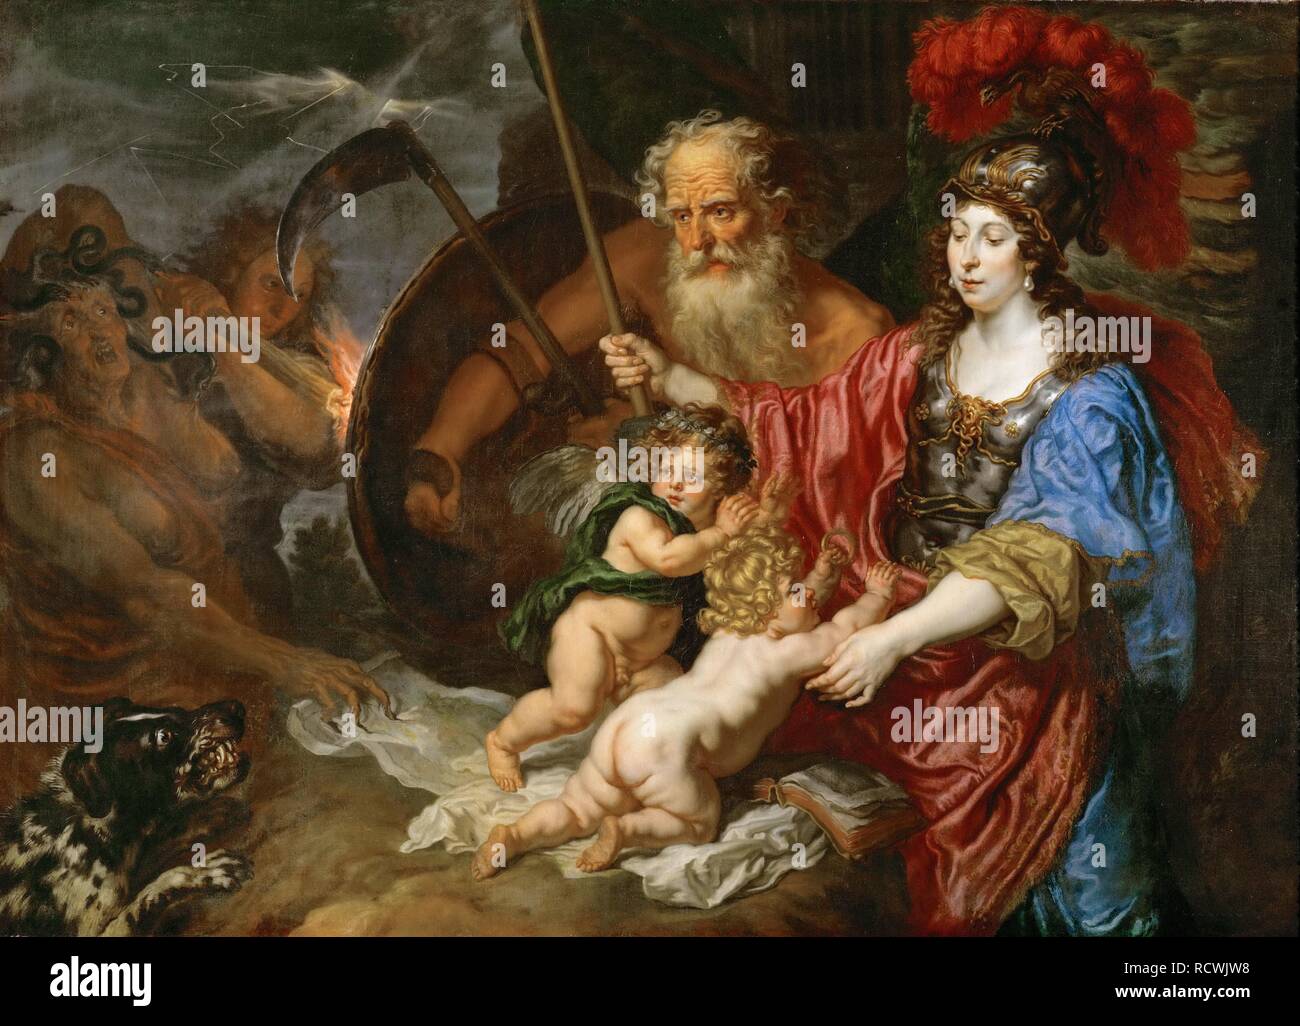 Minerva and Saturn protecting Art and Science from Envy and Falsehood. Museum: Art History Museum, Vienne. Author: VON SANDRART, JOACHIM. Stock Photo